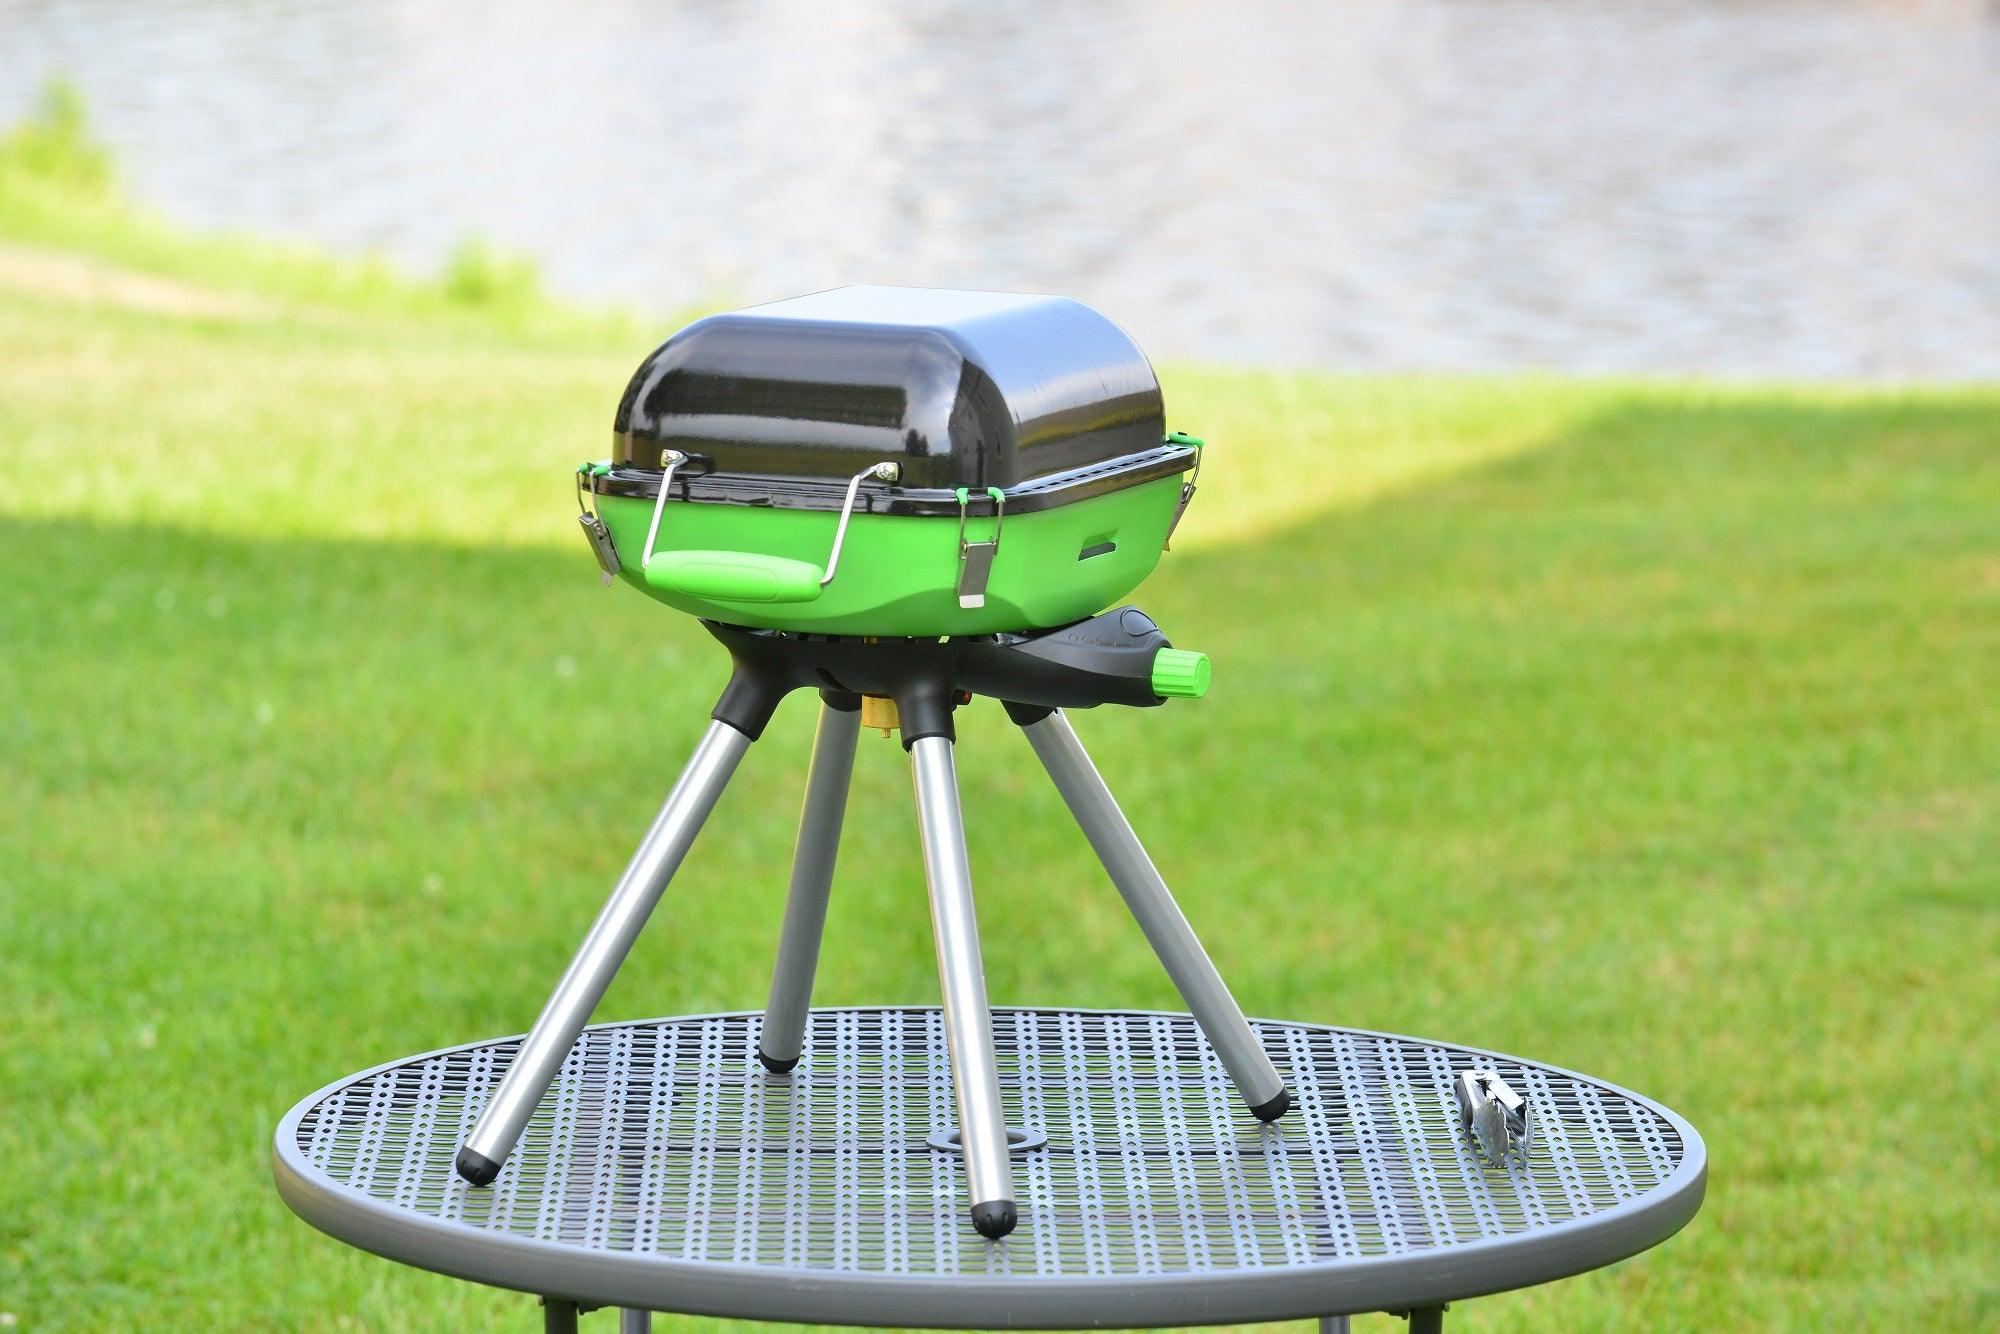 Flame King Multi-Function Portable BBQ Grill Camp Stove Camping - Flame King